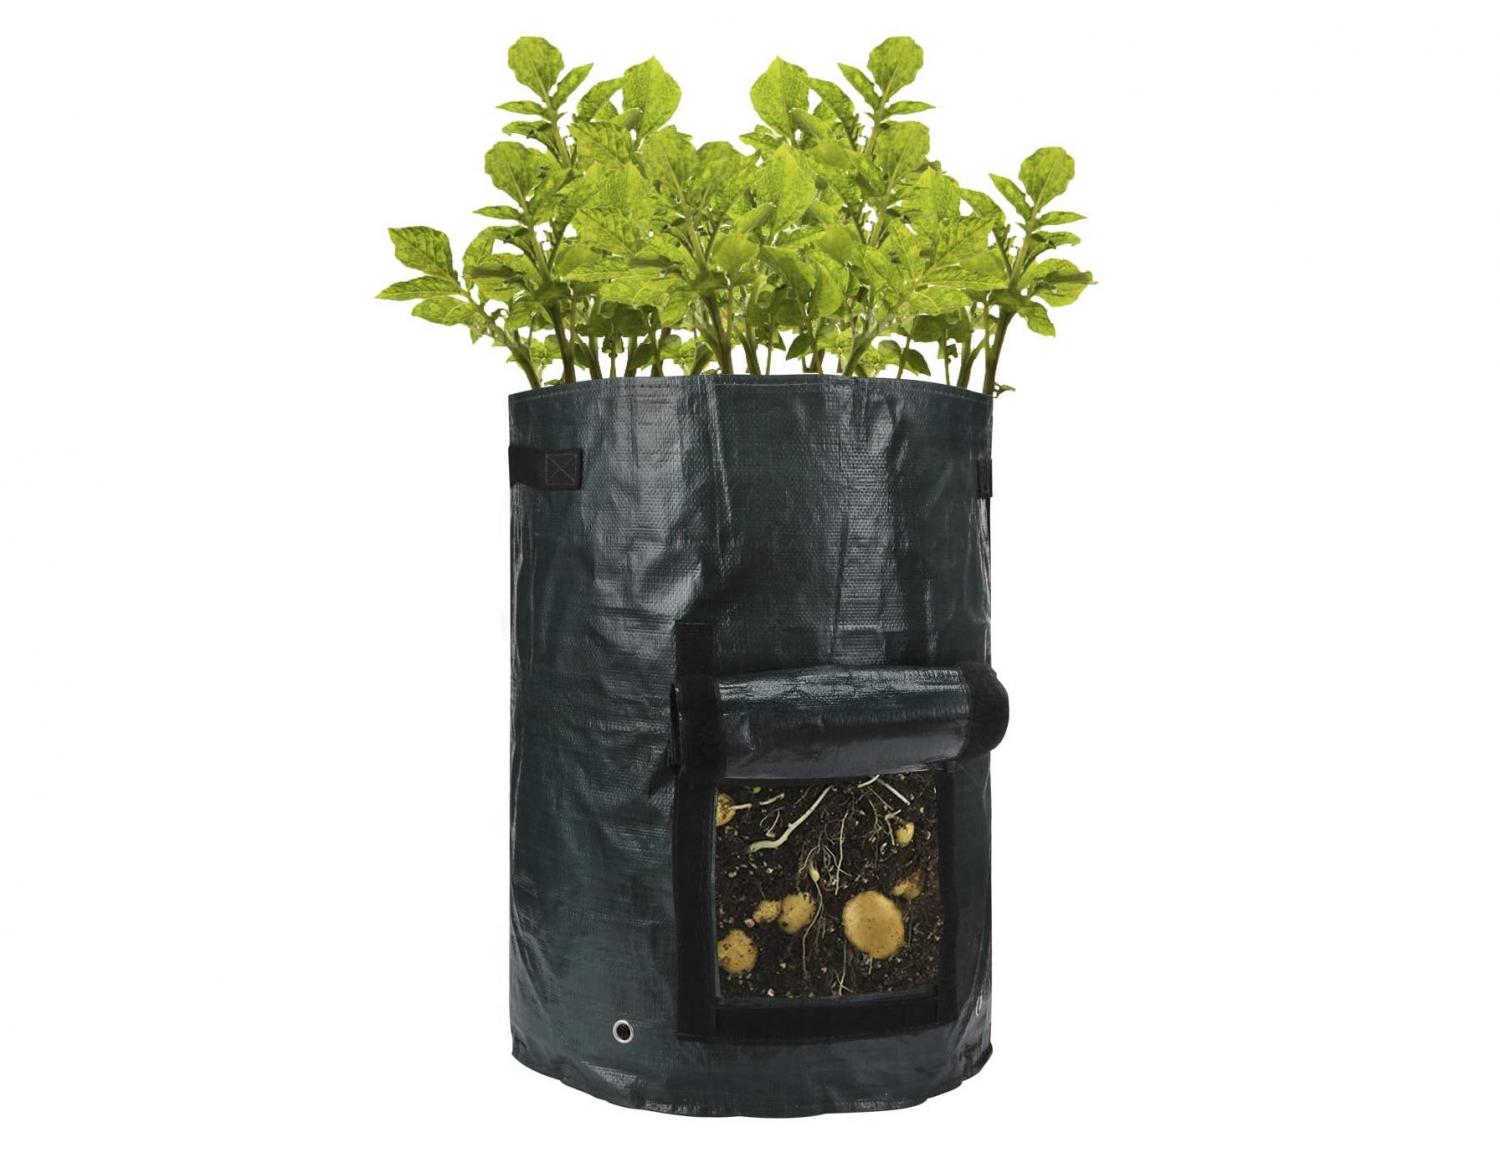 Canvas Potato Planter With a Door/flap to easily access your homegrown potatoes